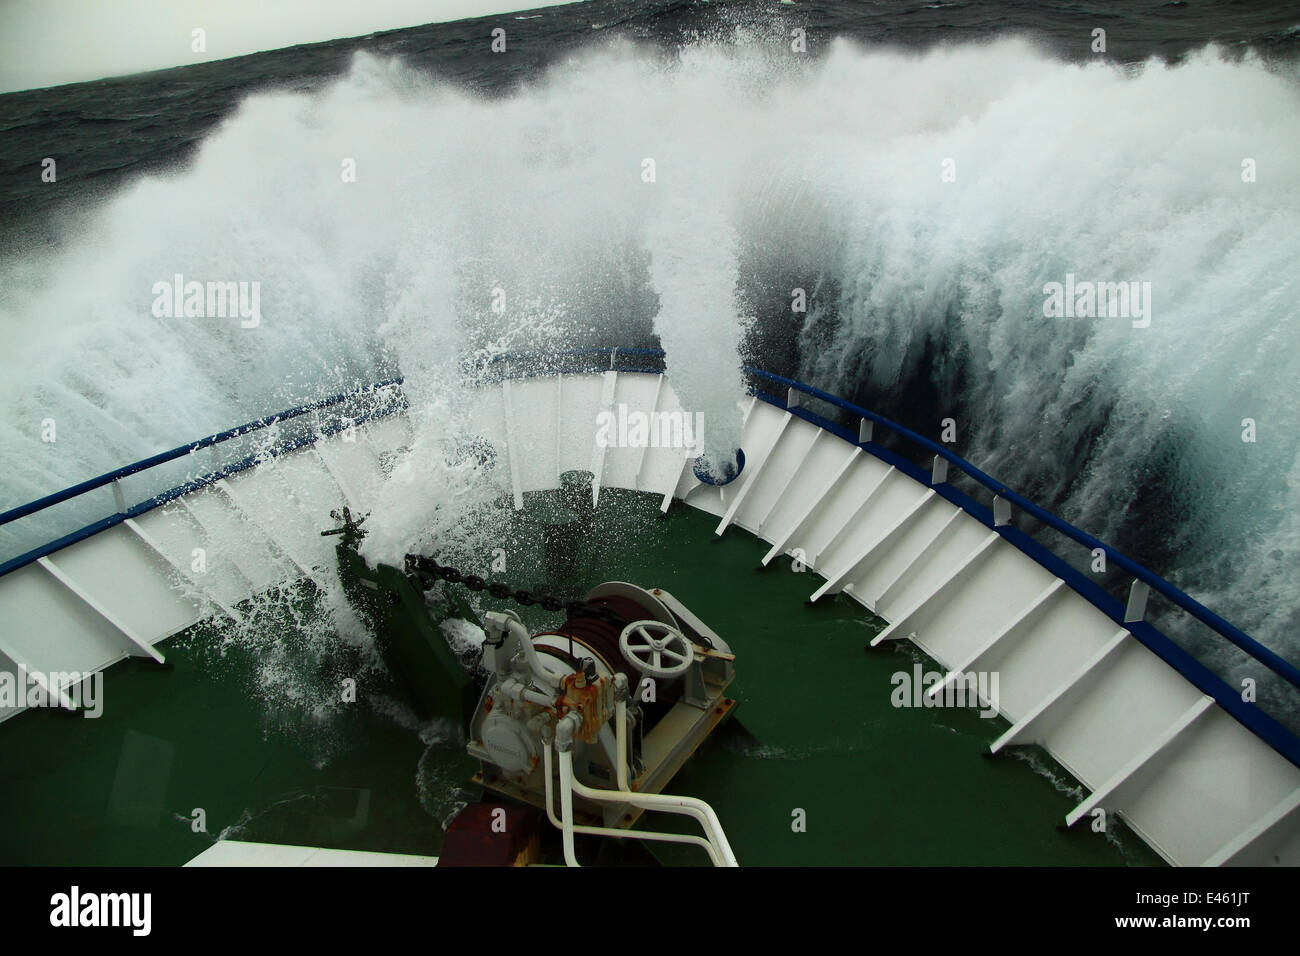 Huge wave hitting the bow of fishing vessel on the North Sea, Europe, April 2011. Property released. Stock Photo